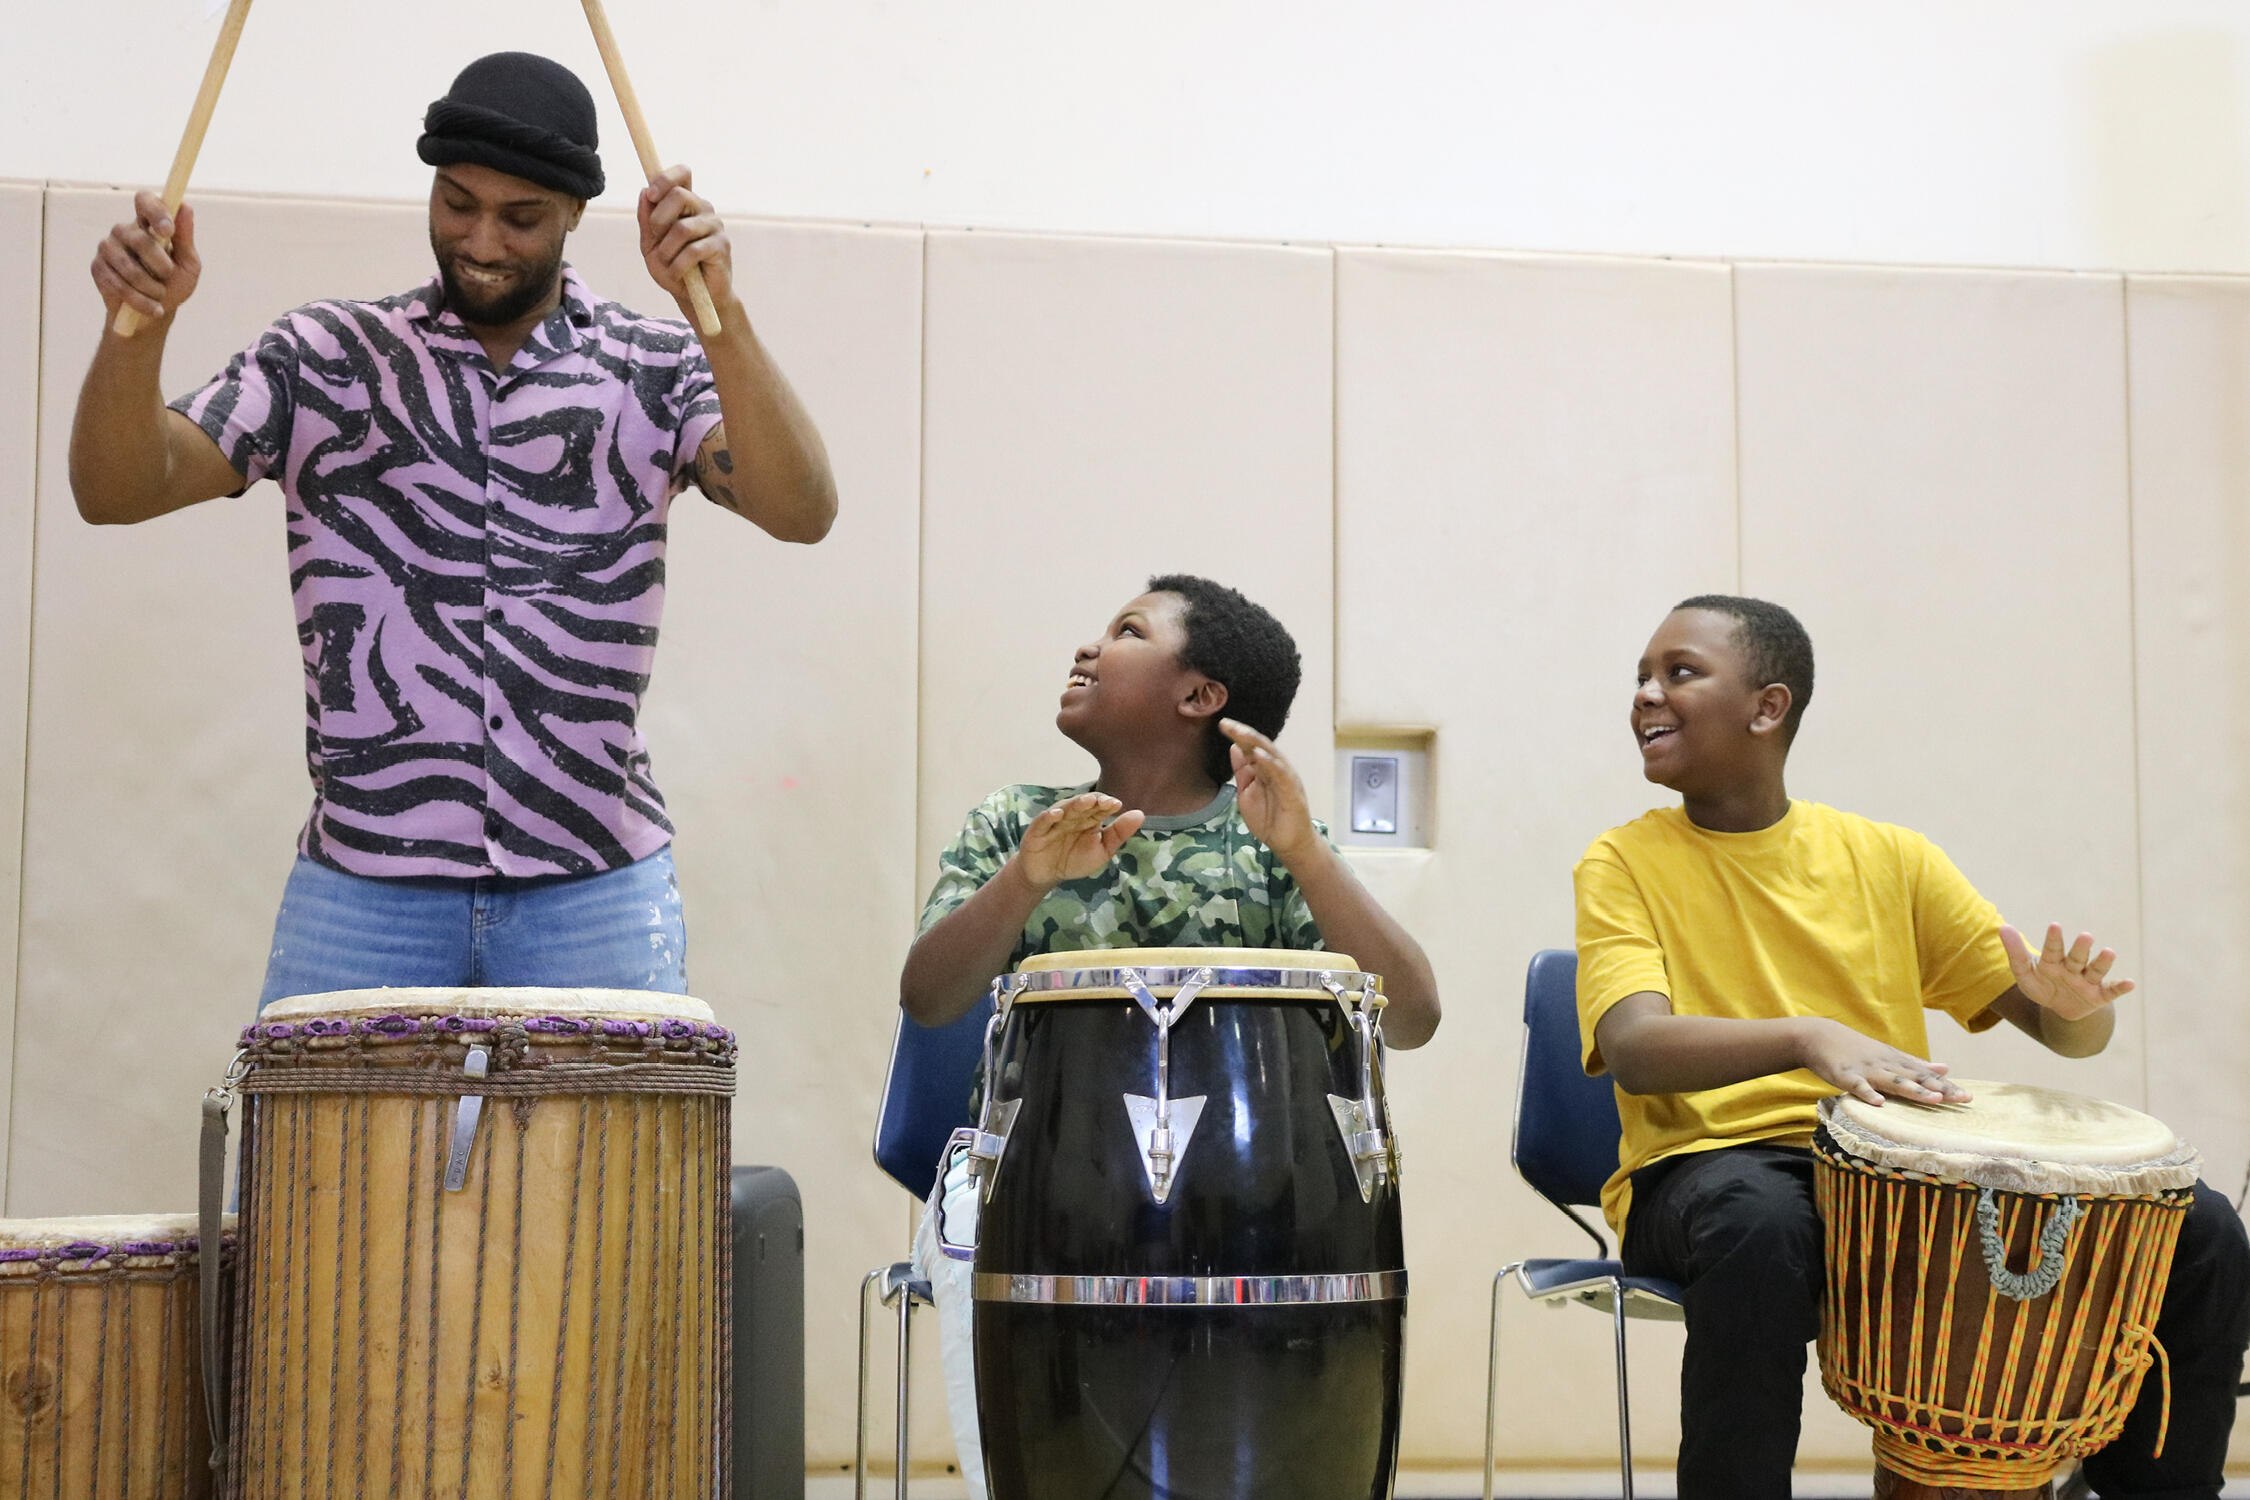 Students drumming with a community partner